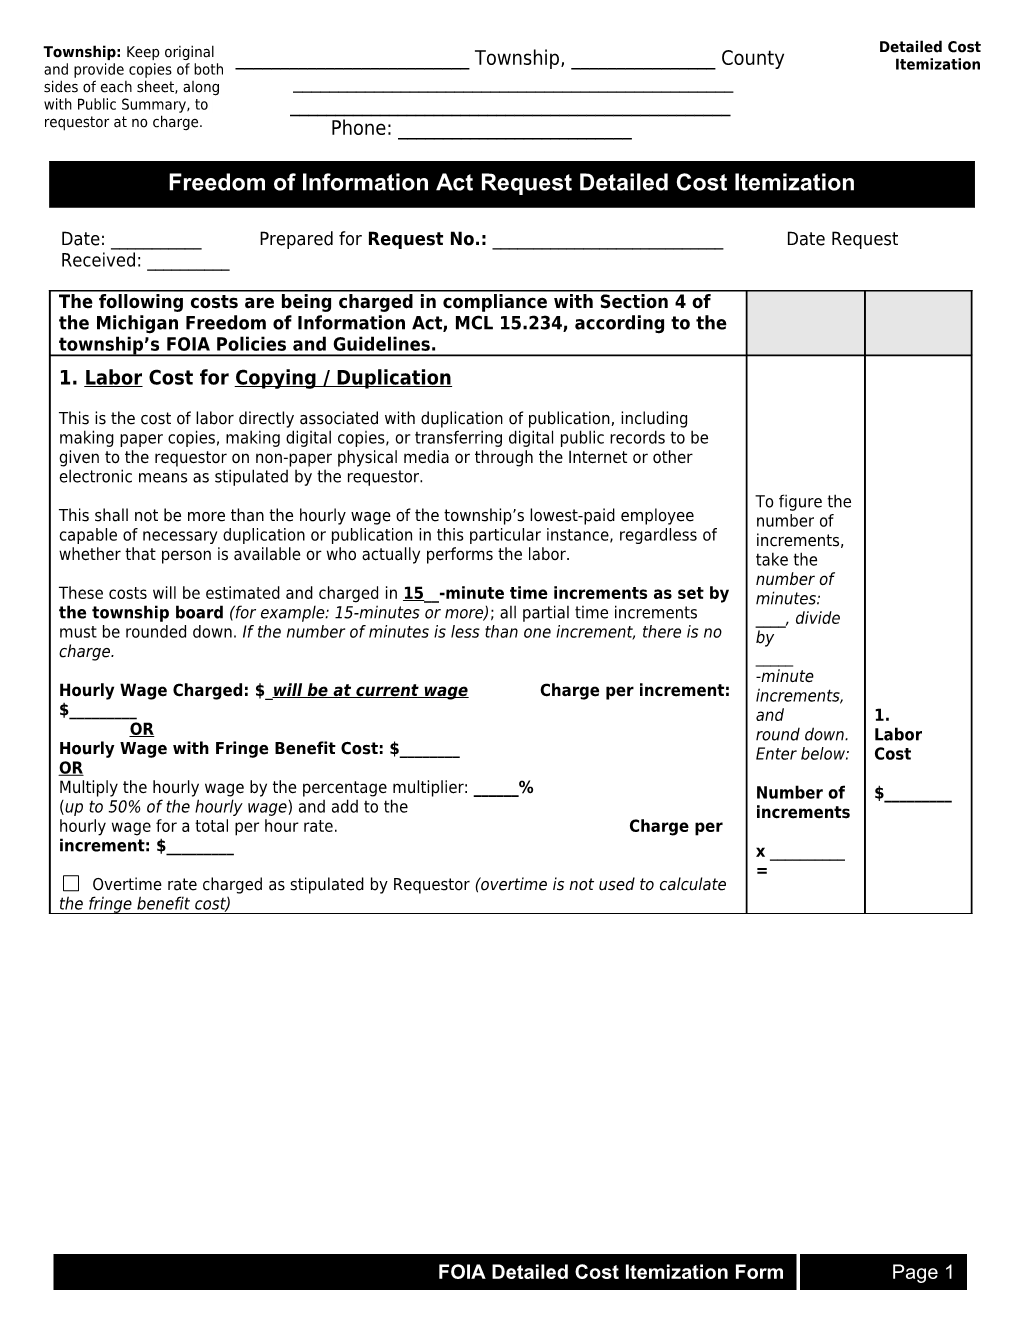 Freedom of Information Act Request Itemized Cost Worksheet